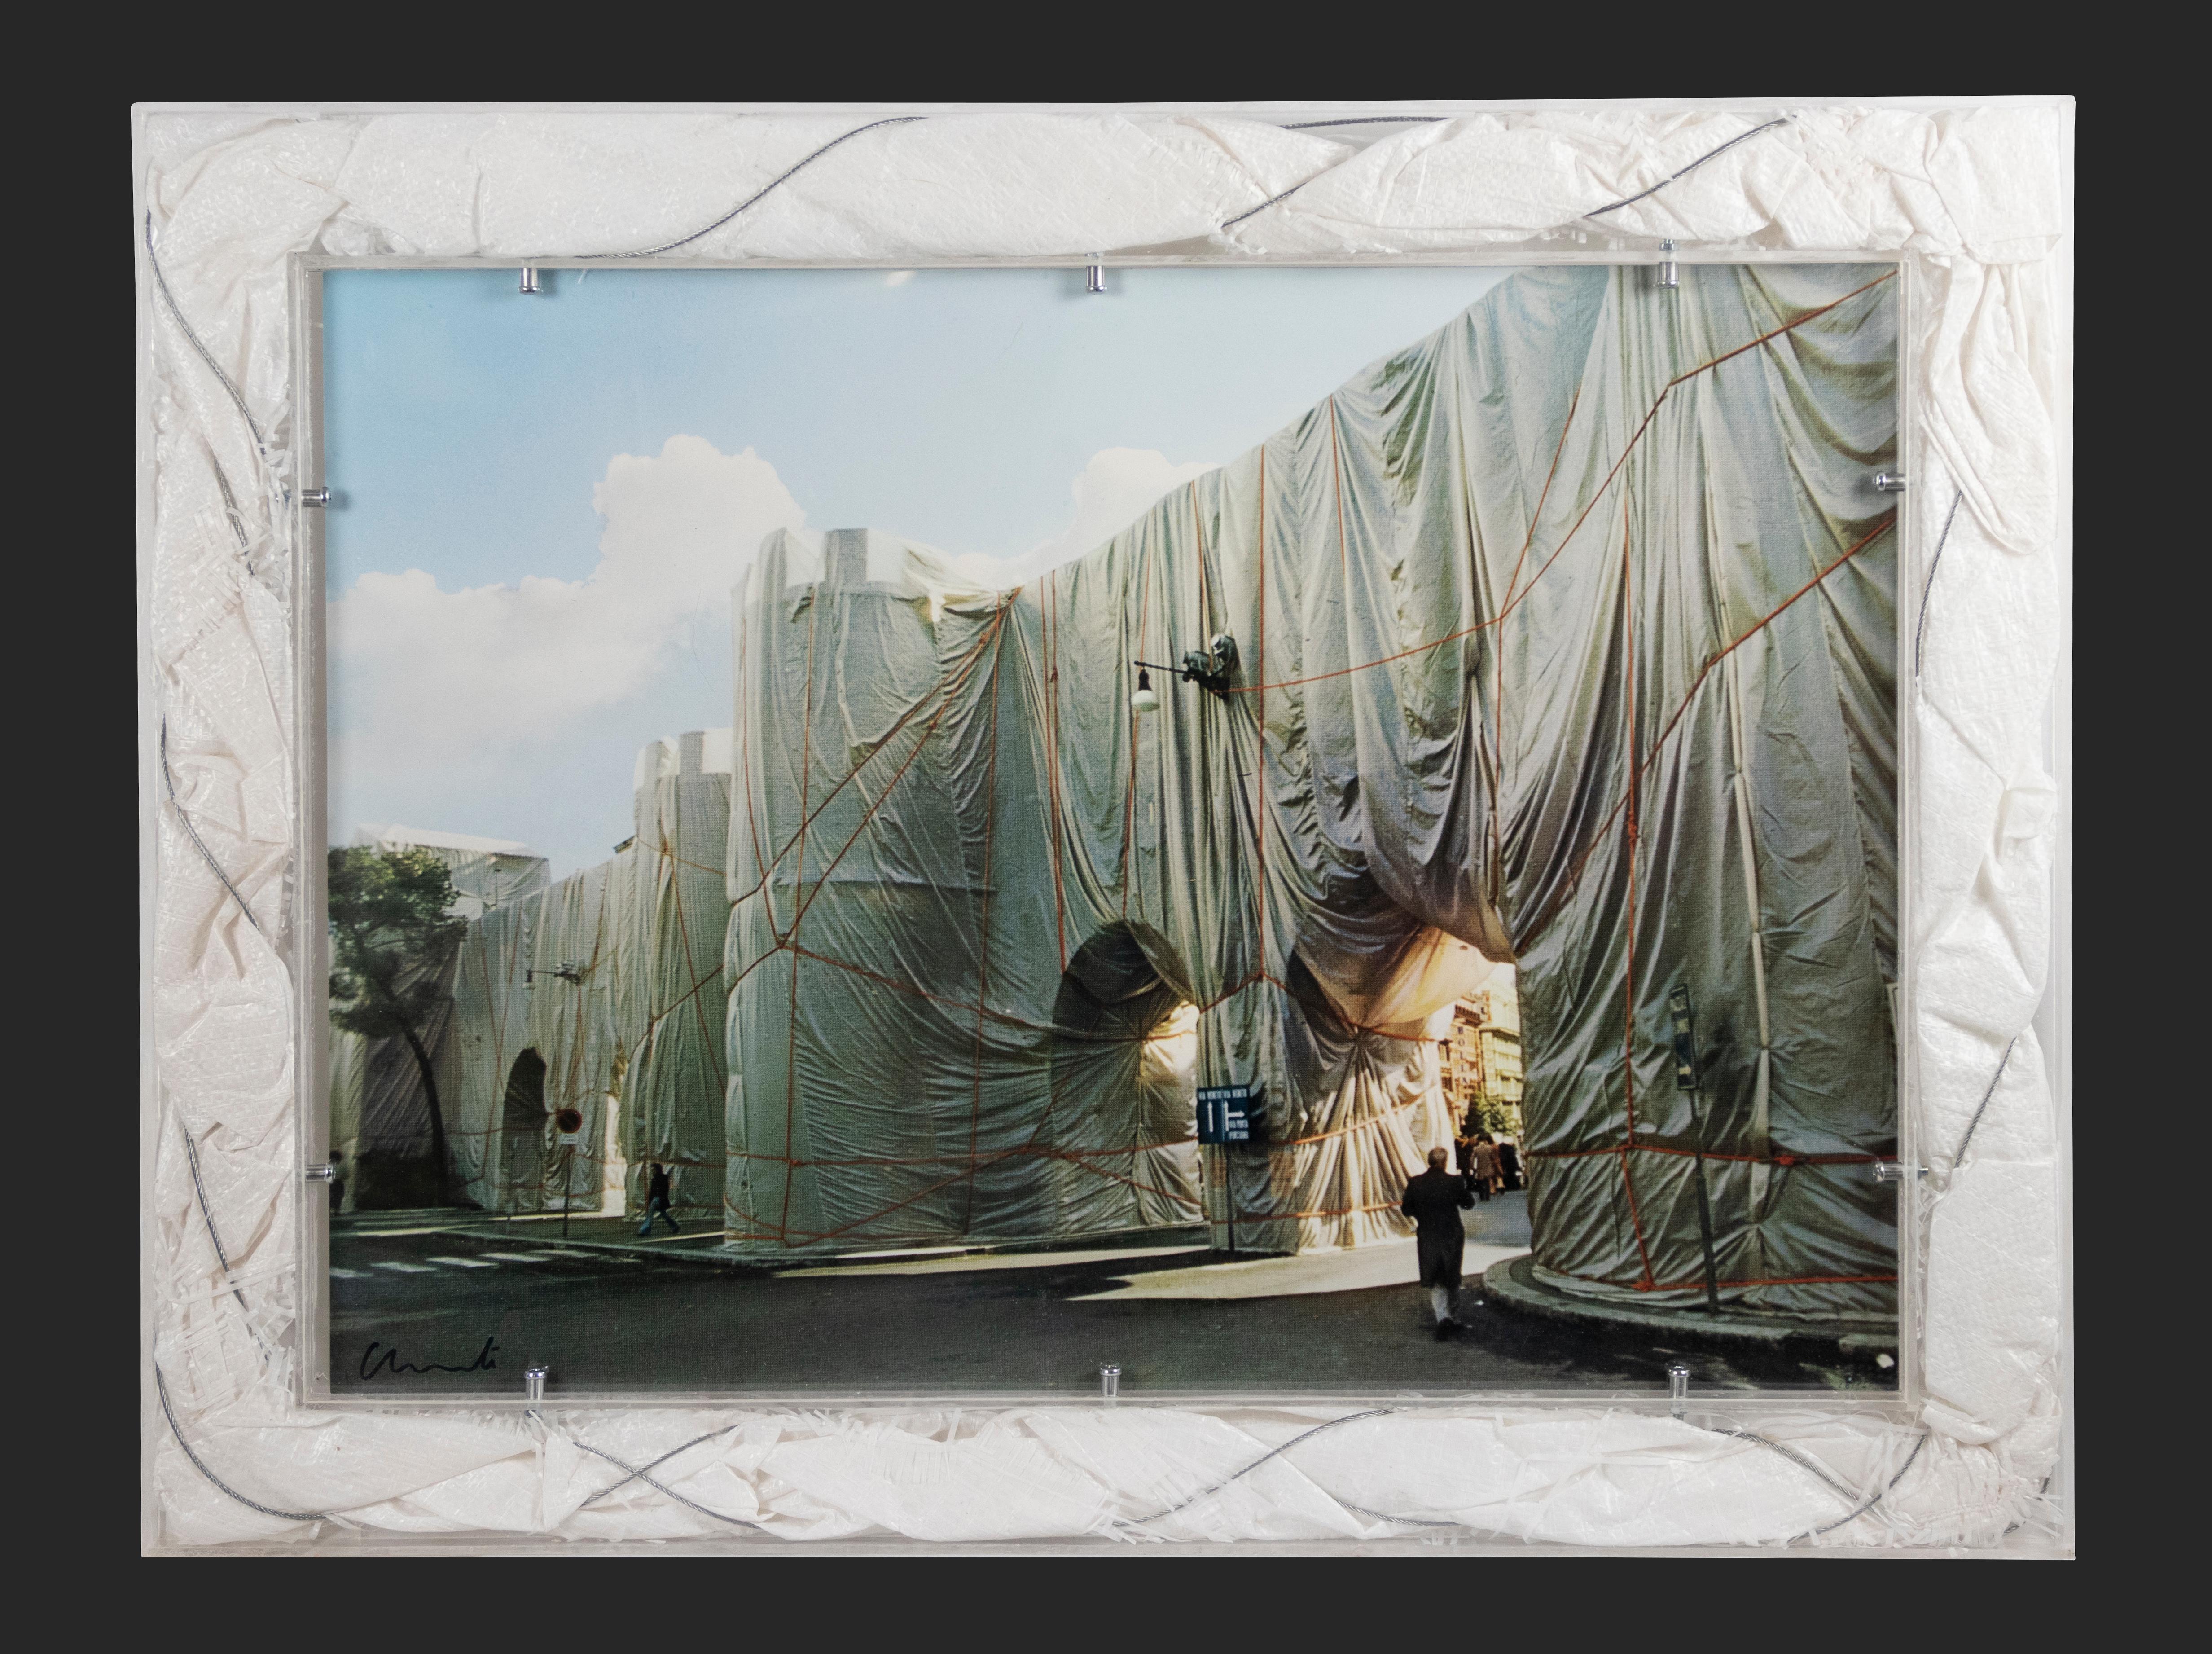 The Wall - Wrapped Roman Wall by Christo - 1974